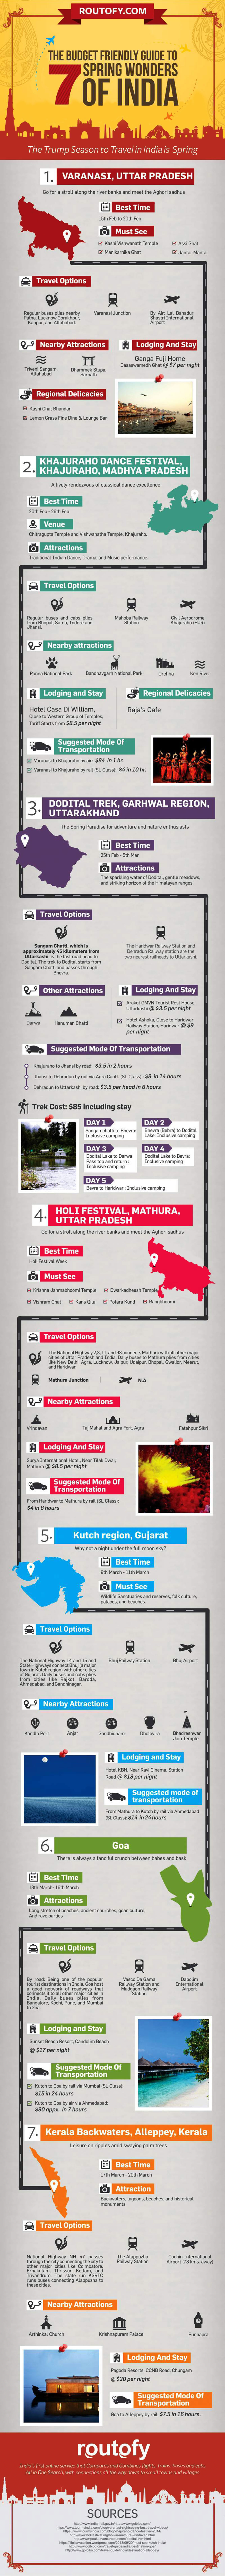 Budget Trips in India during Spring - Travel Infographic